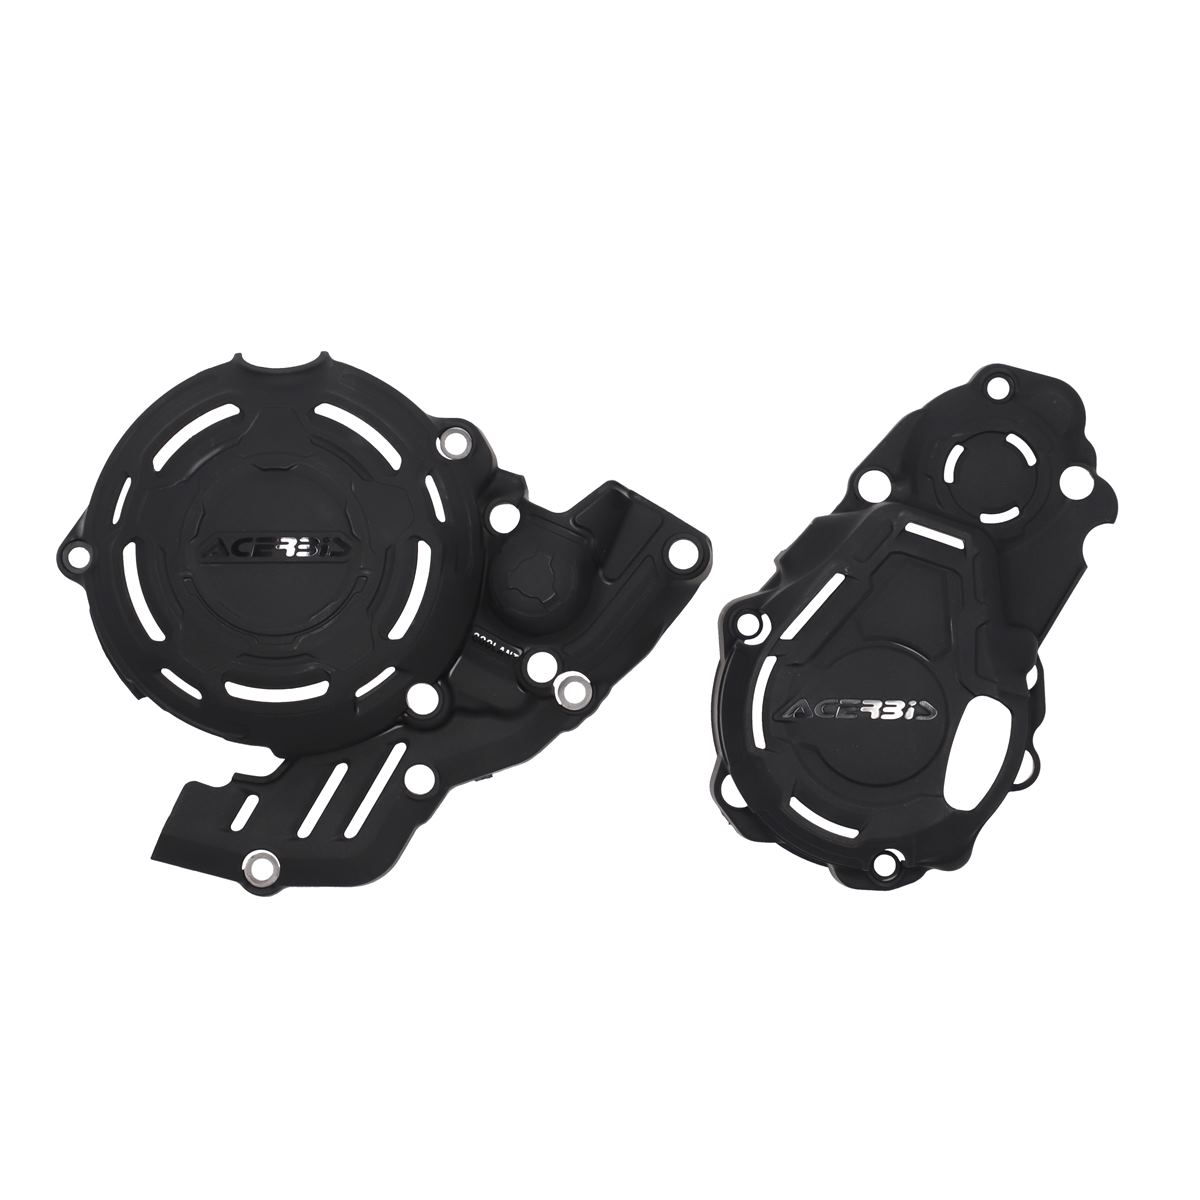 Acerbis Clutch/Ignition Cover Protection X-Power Gas Gas MC-F 250/350, Black